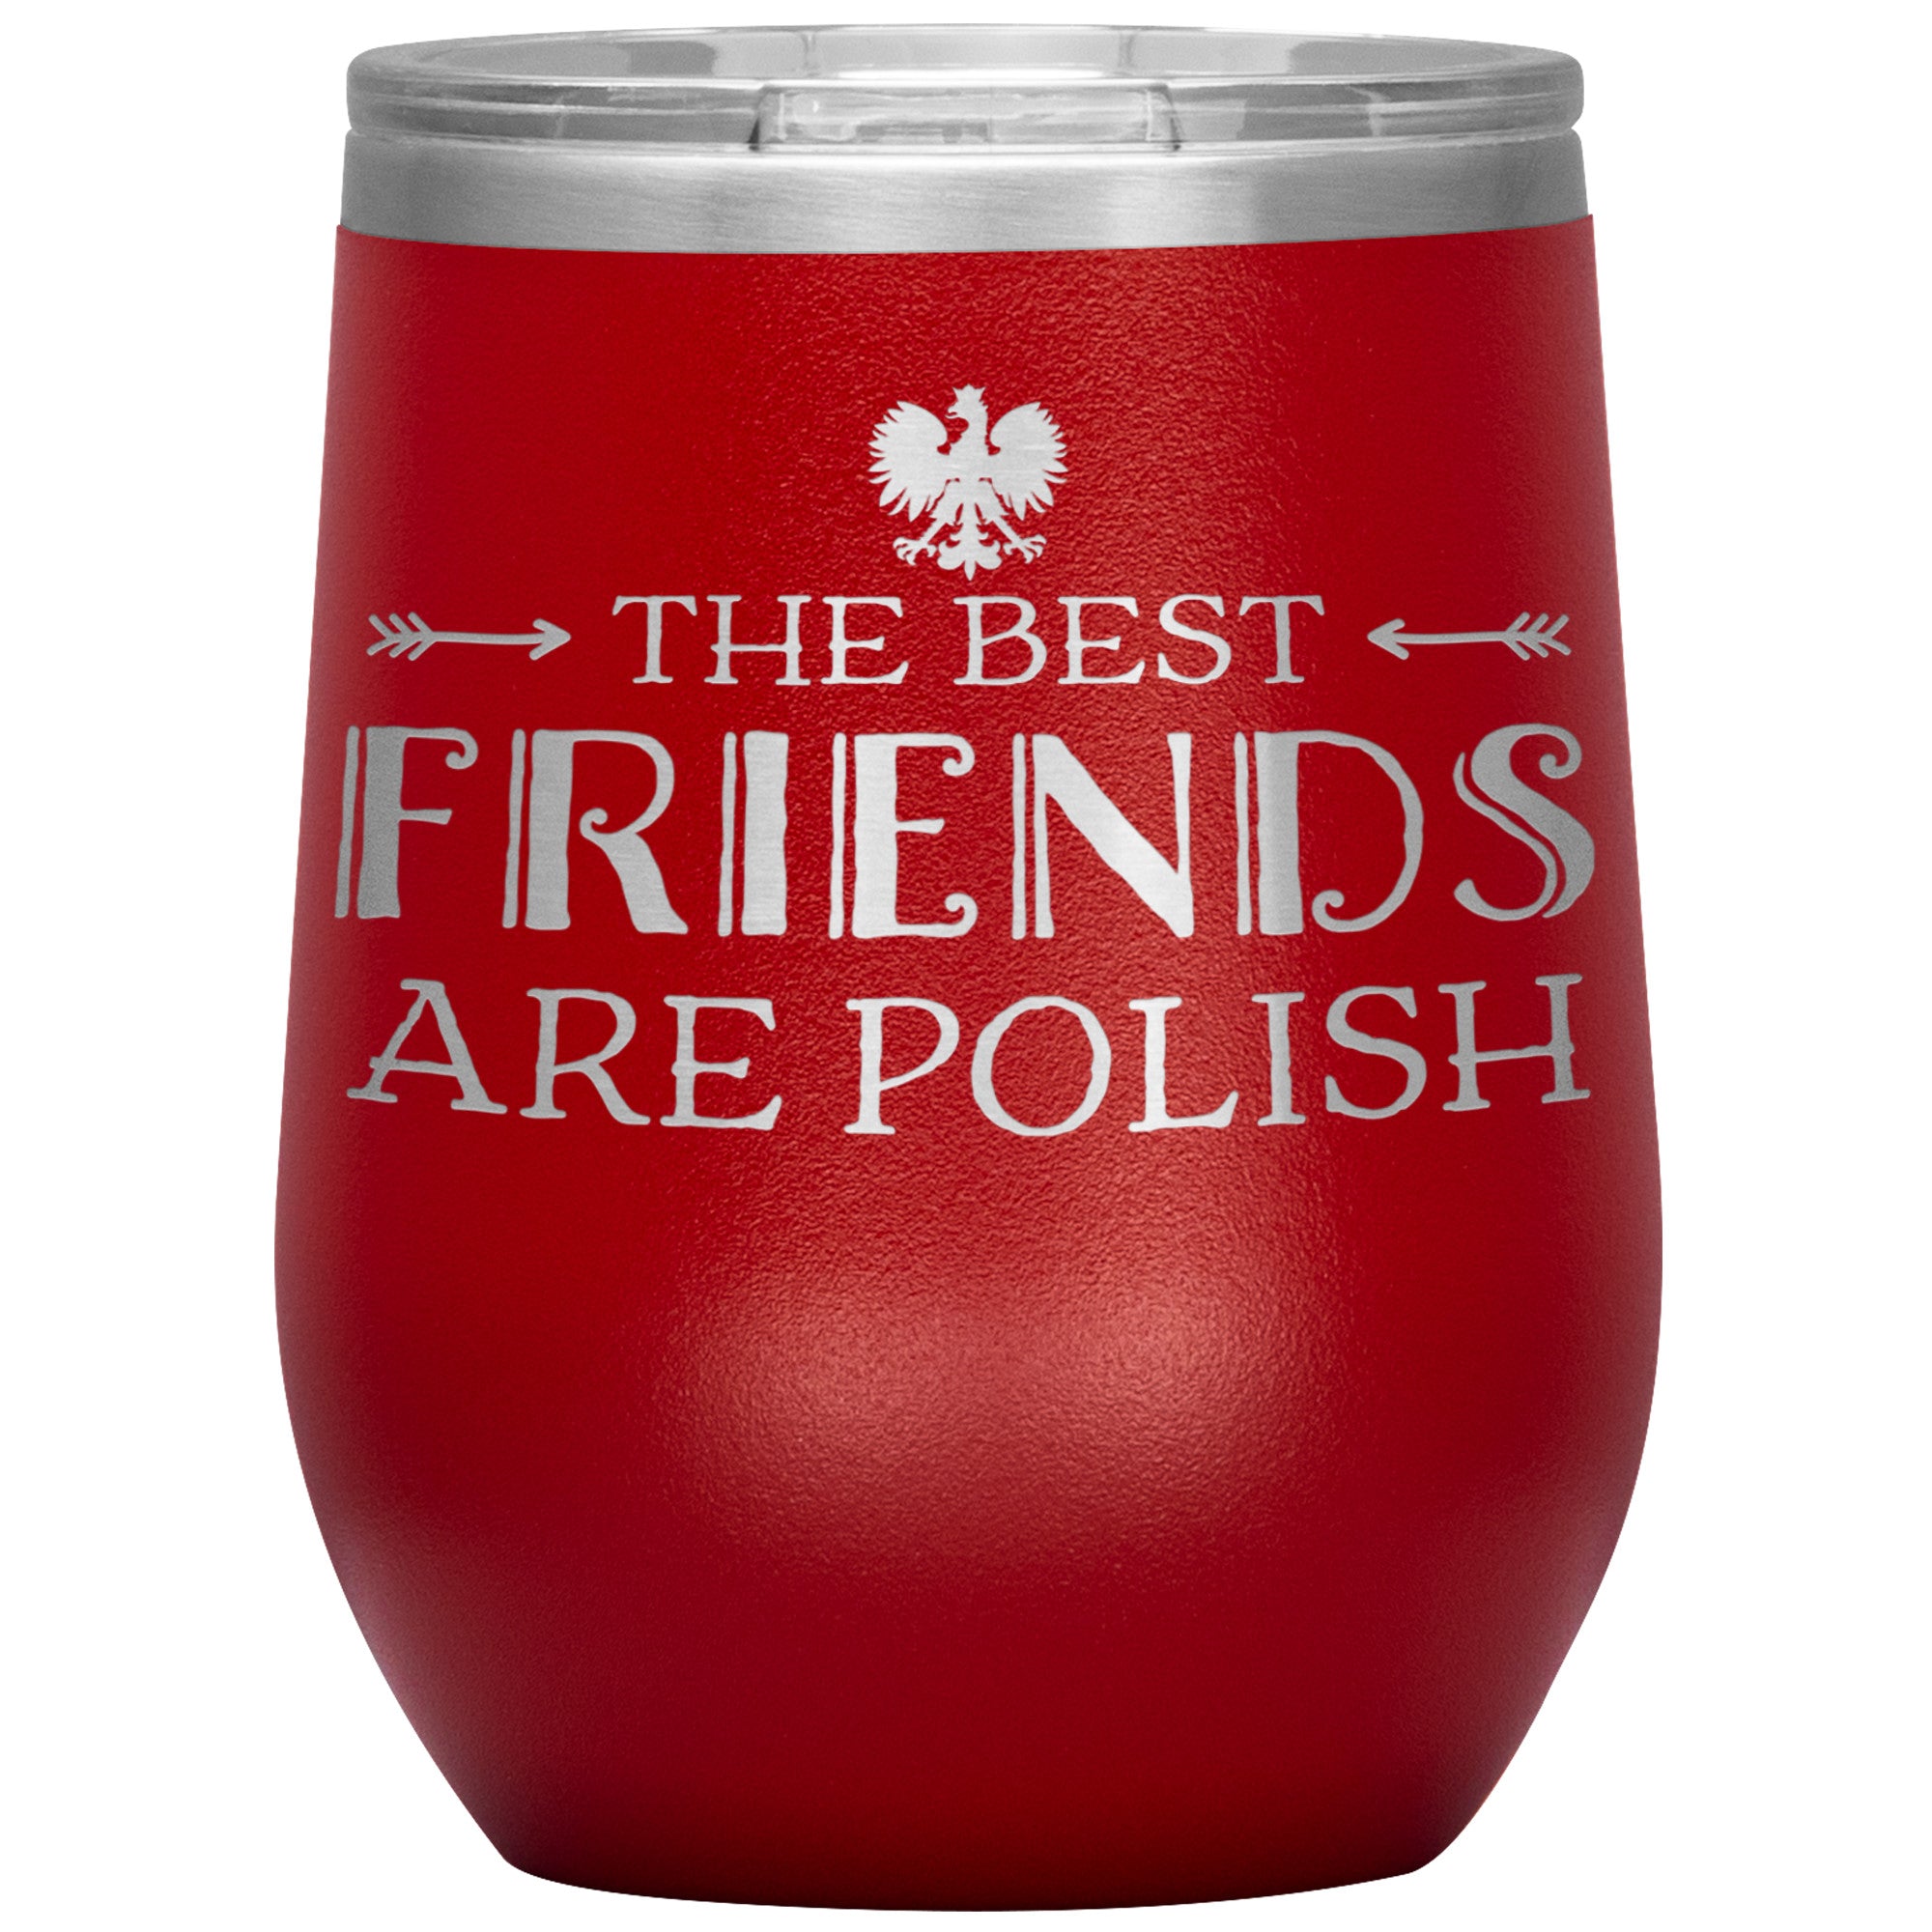 The Best Friends Are Polish Insulated Wine Tumbler Tumblers teelaunch Red  